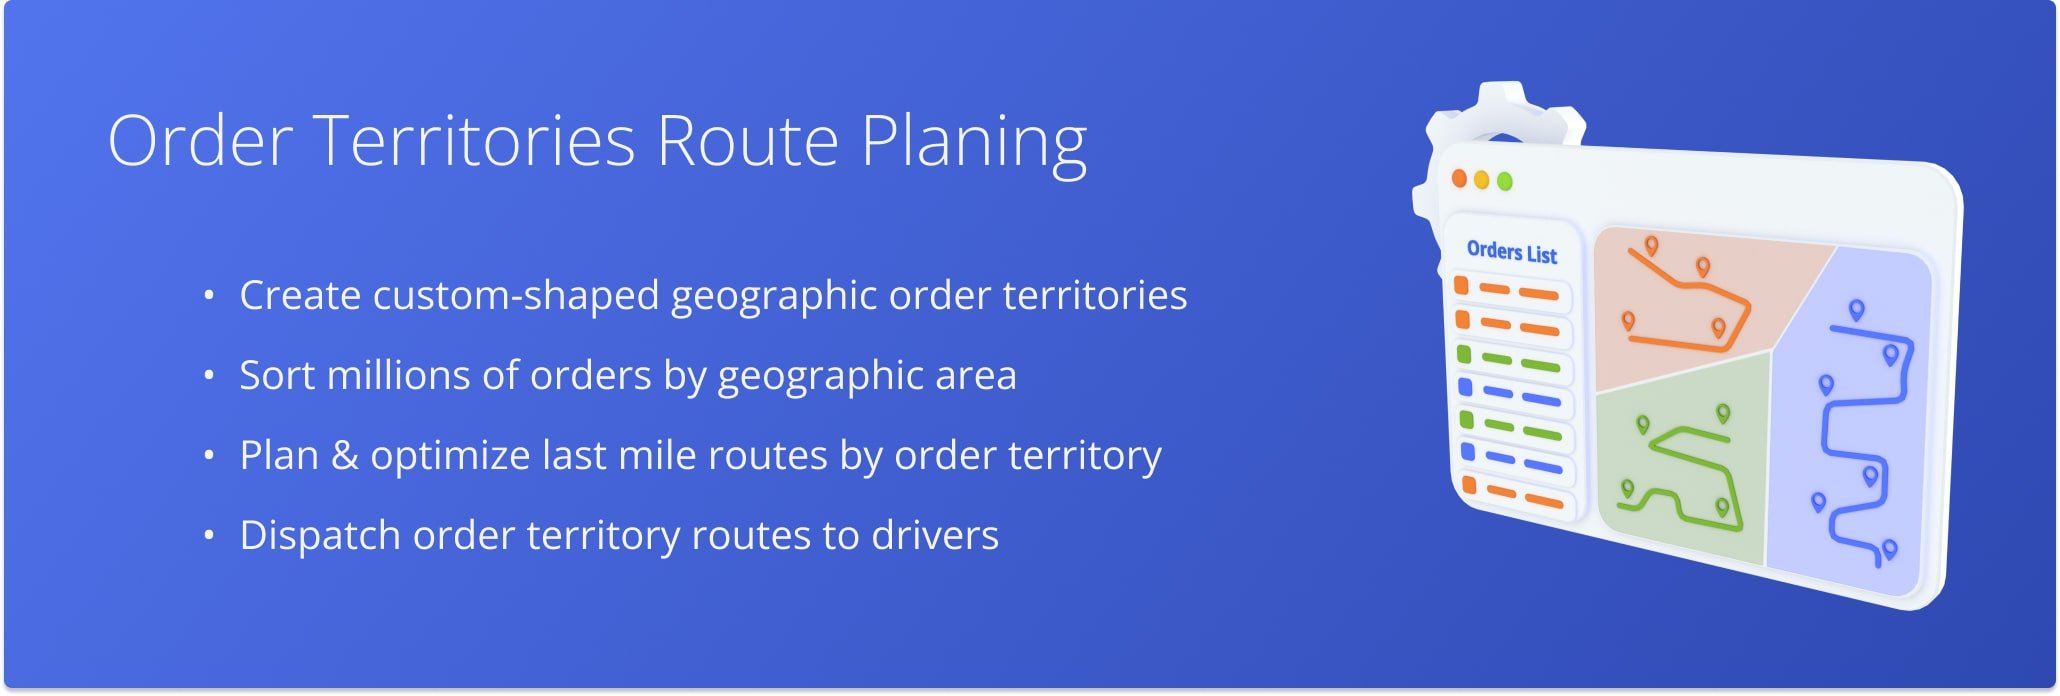 Route4Me's Territory Orders are used for optimizing multi-stop routes within geographical areas.